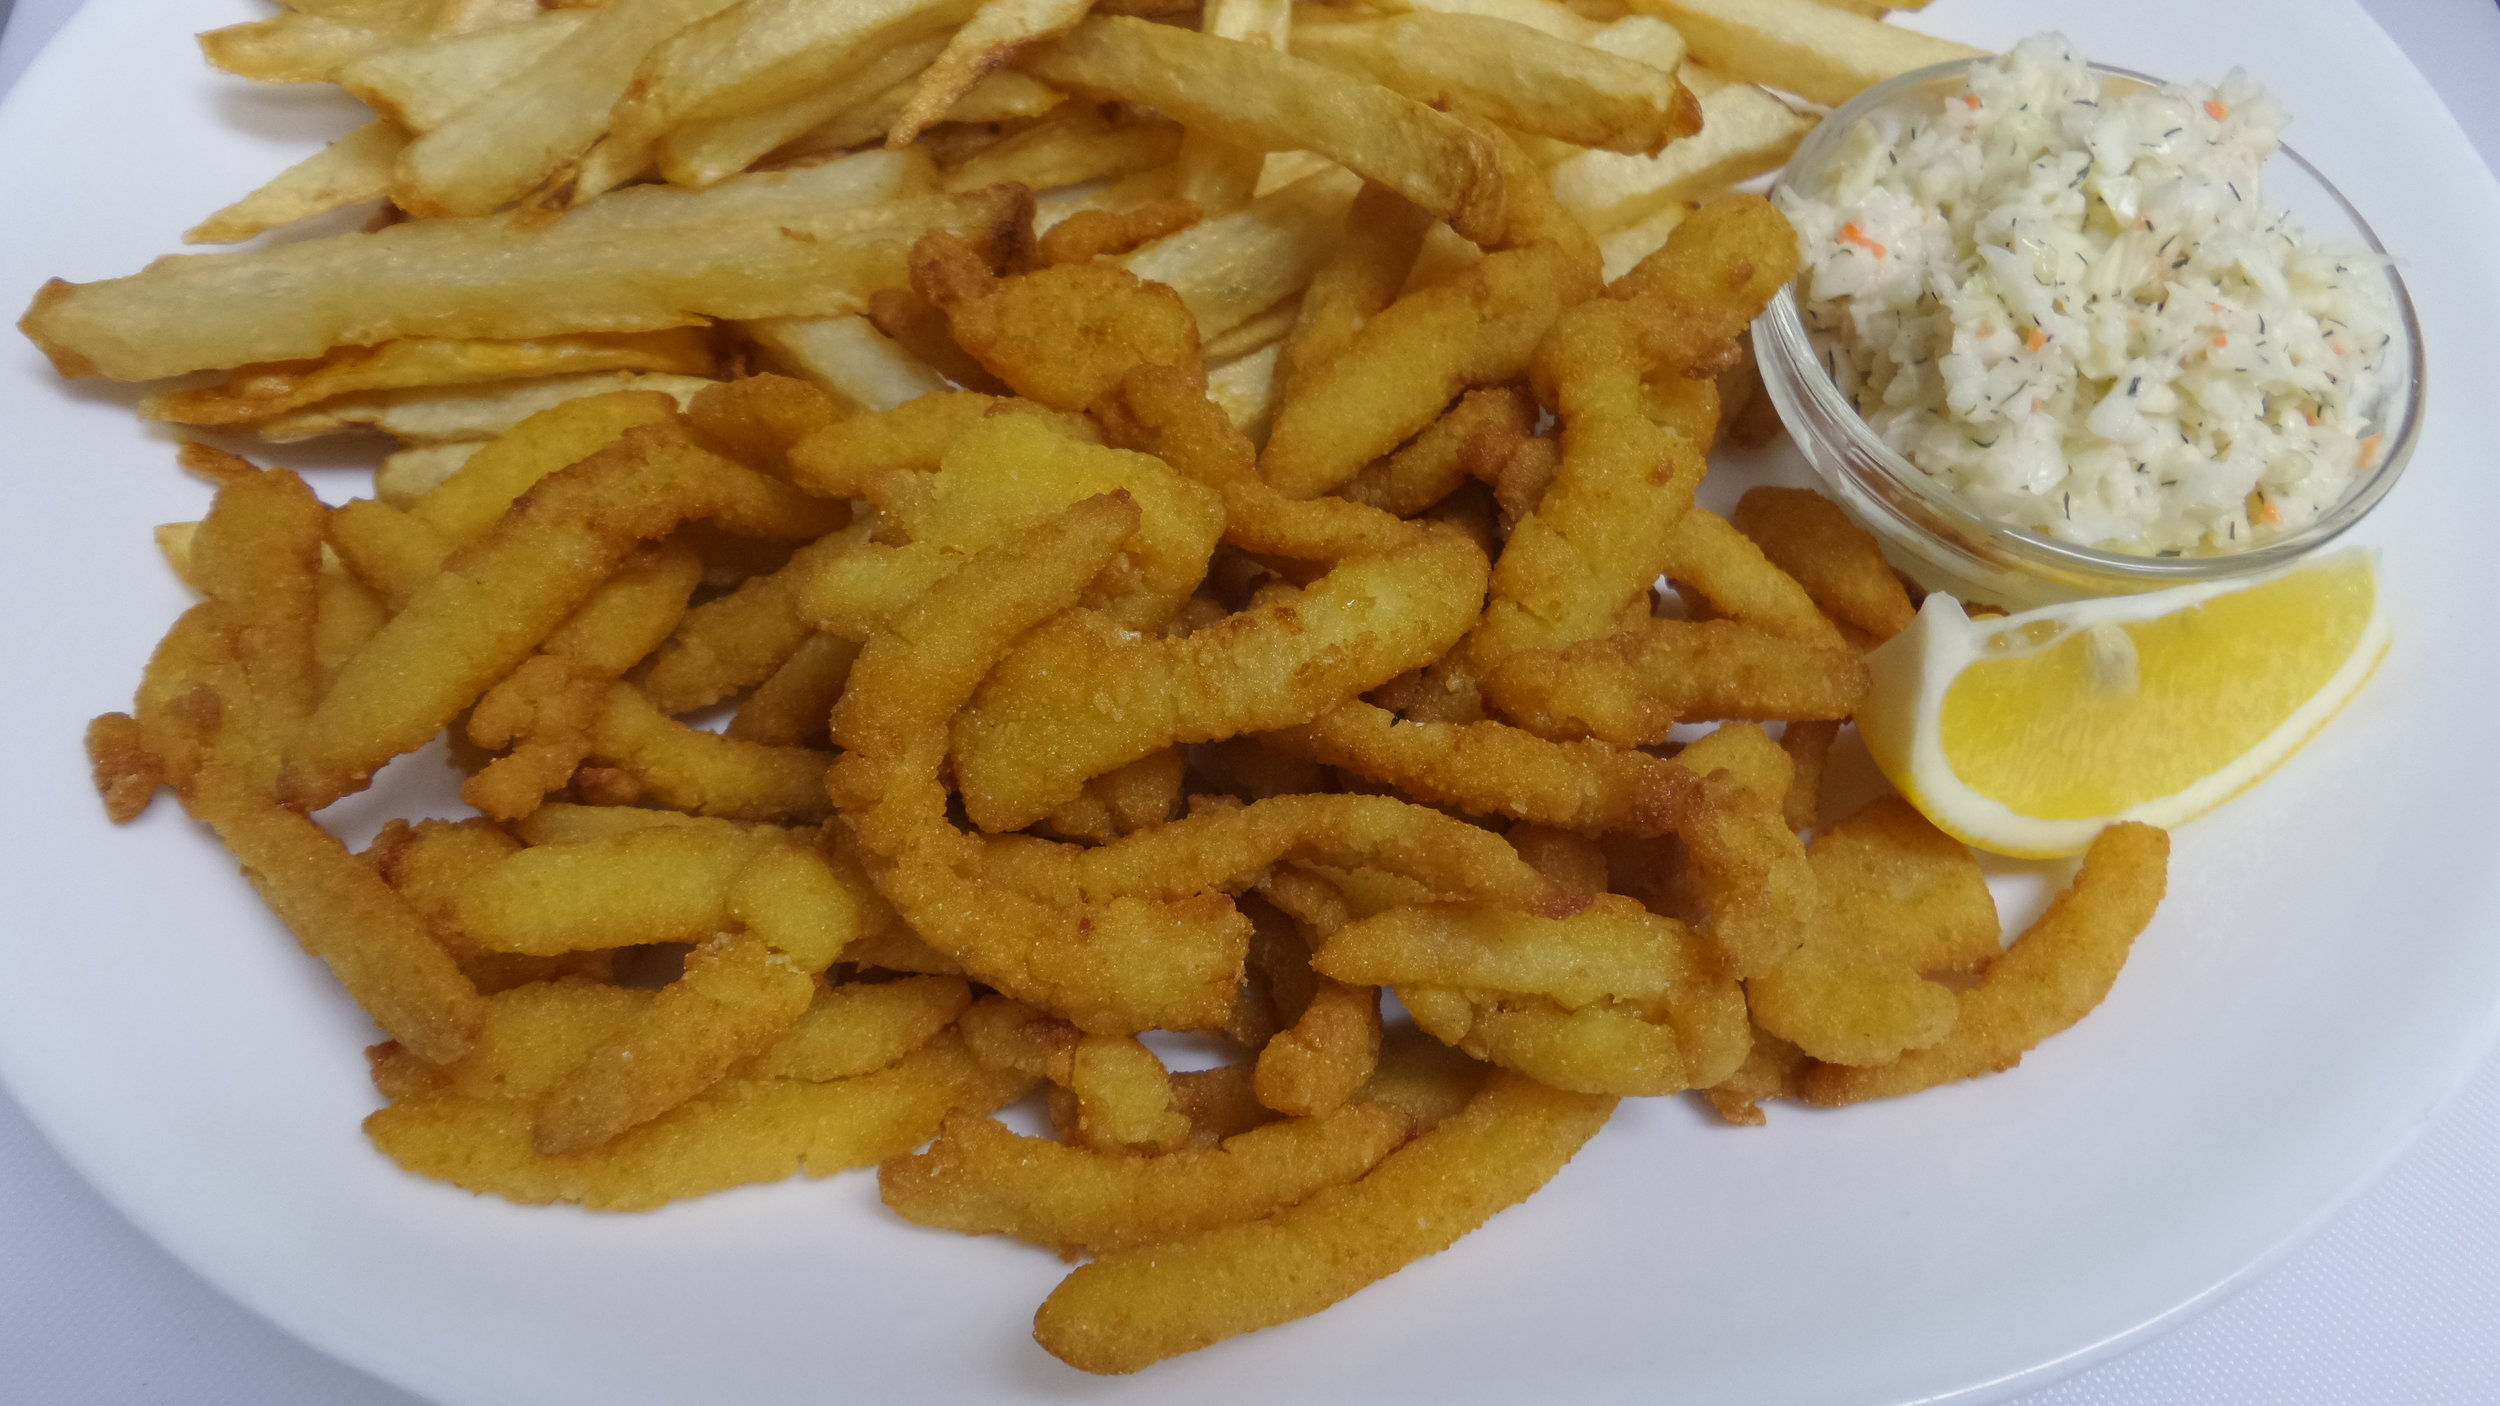 Clam Strips (8 oz) and Chips